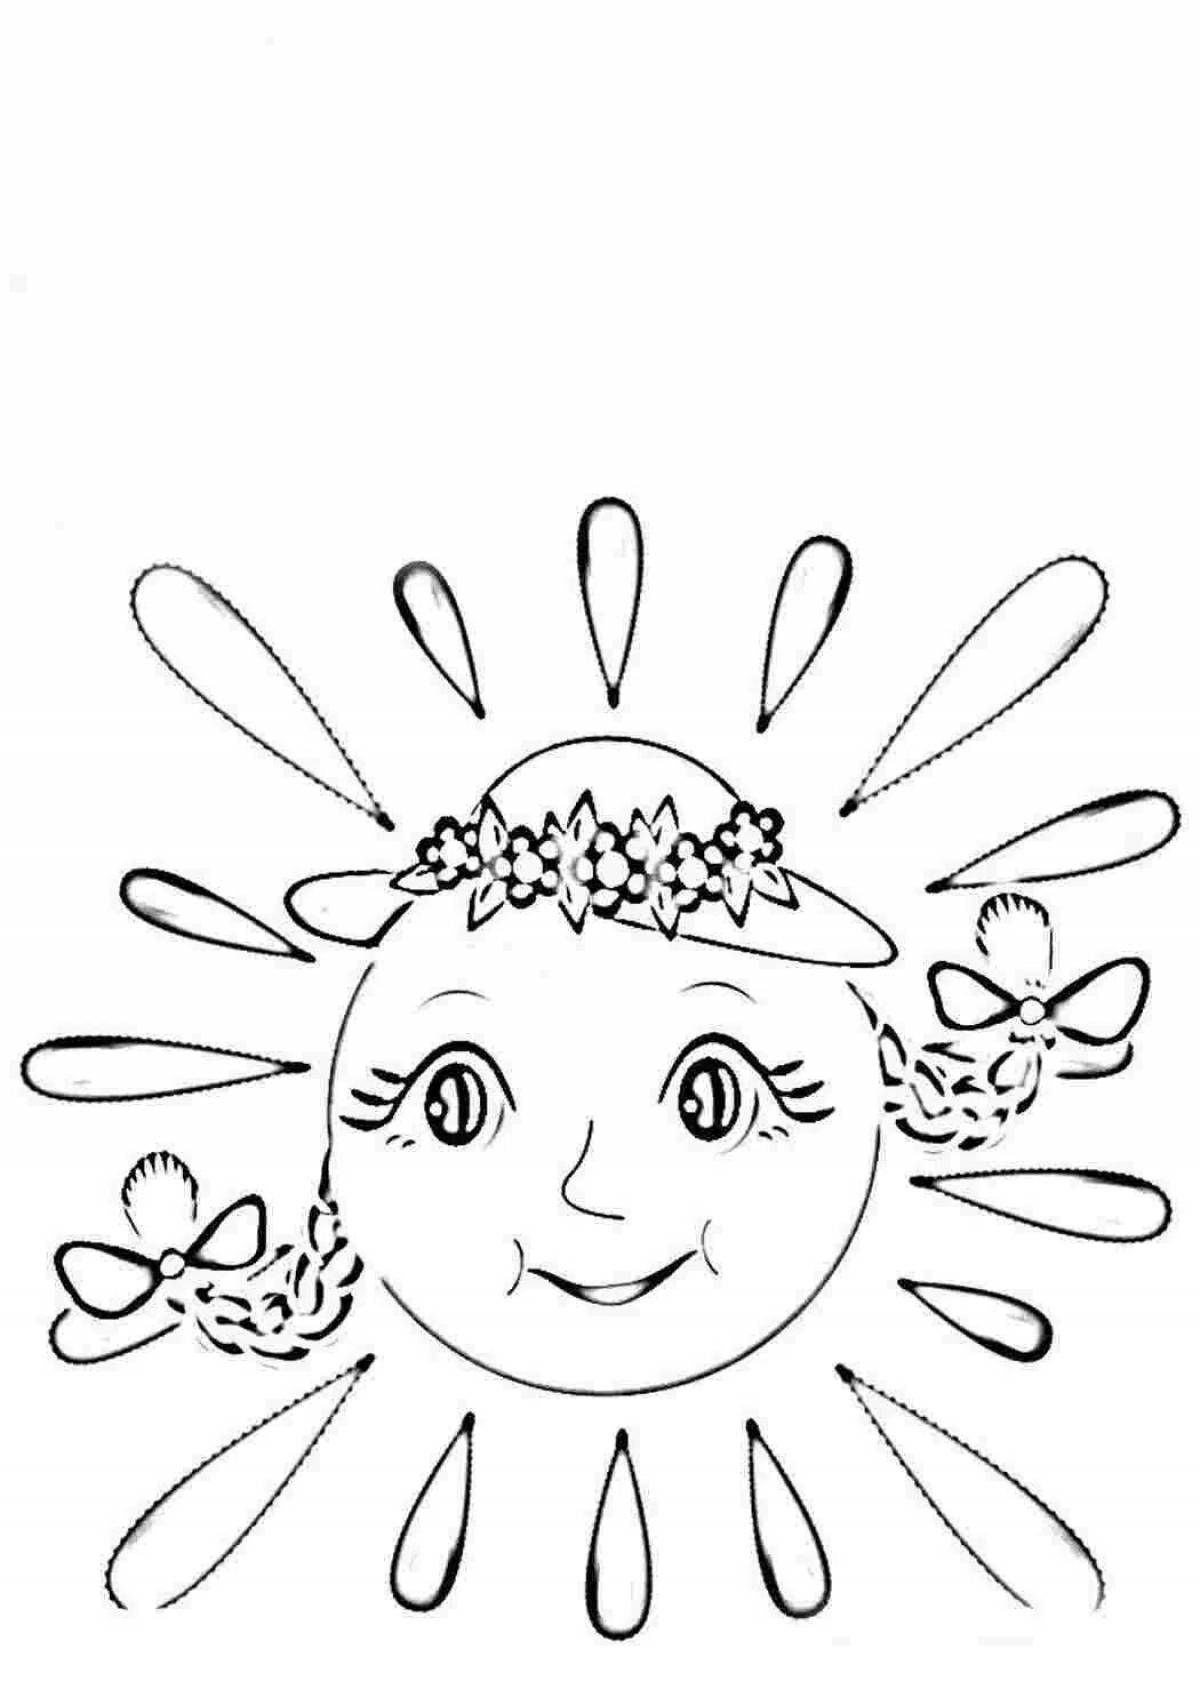 Fairy coloring sun for kids